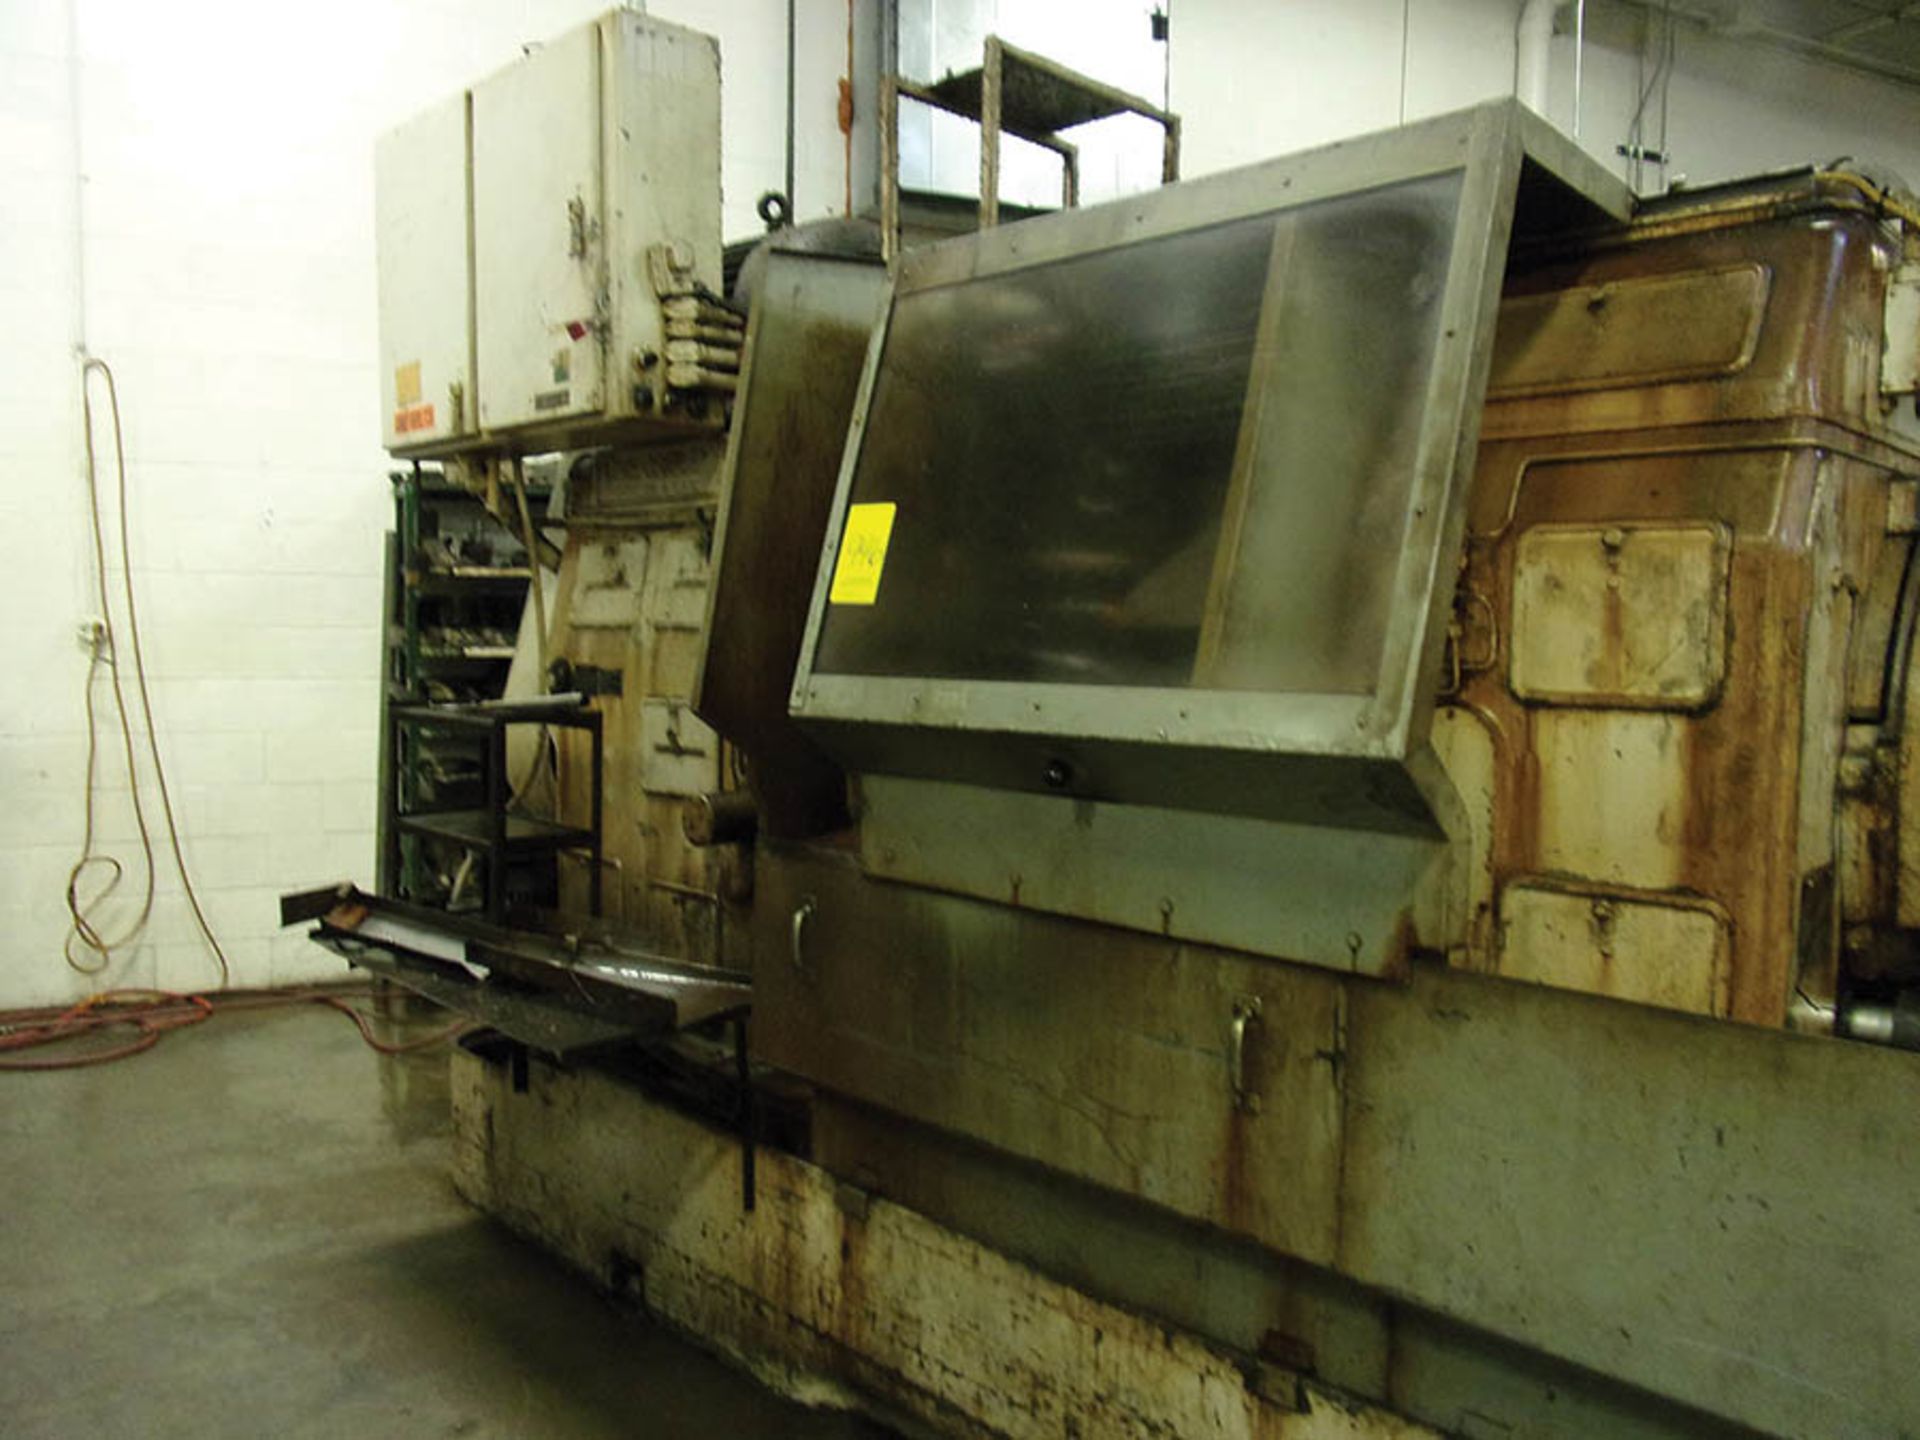 2 5/8'' ACME GRIDLEY RB-8 AUTOMATIC BAR MACHINE; REAMING ARM, PICKOFF BLOCK, MOST SLIDES, S/N 96473